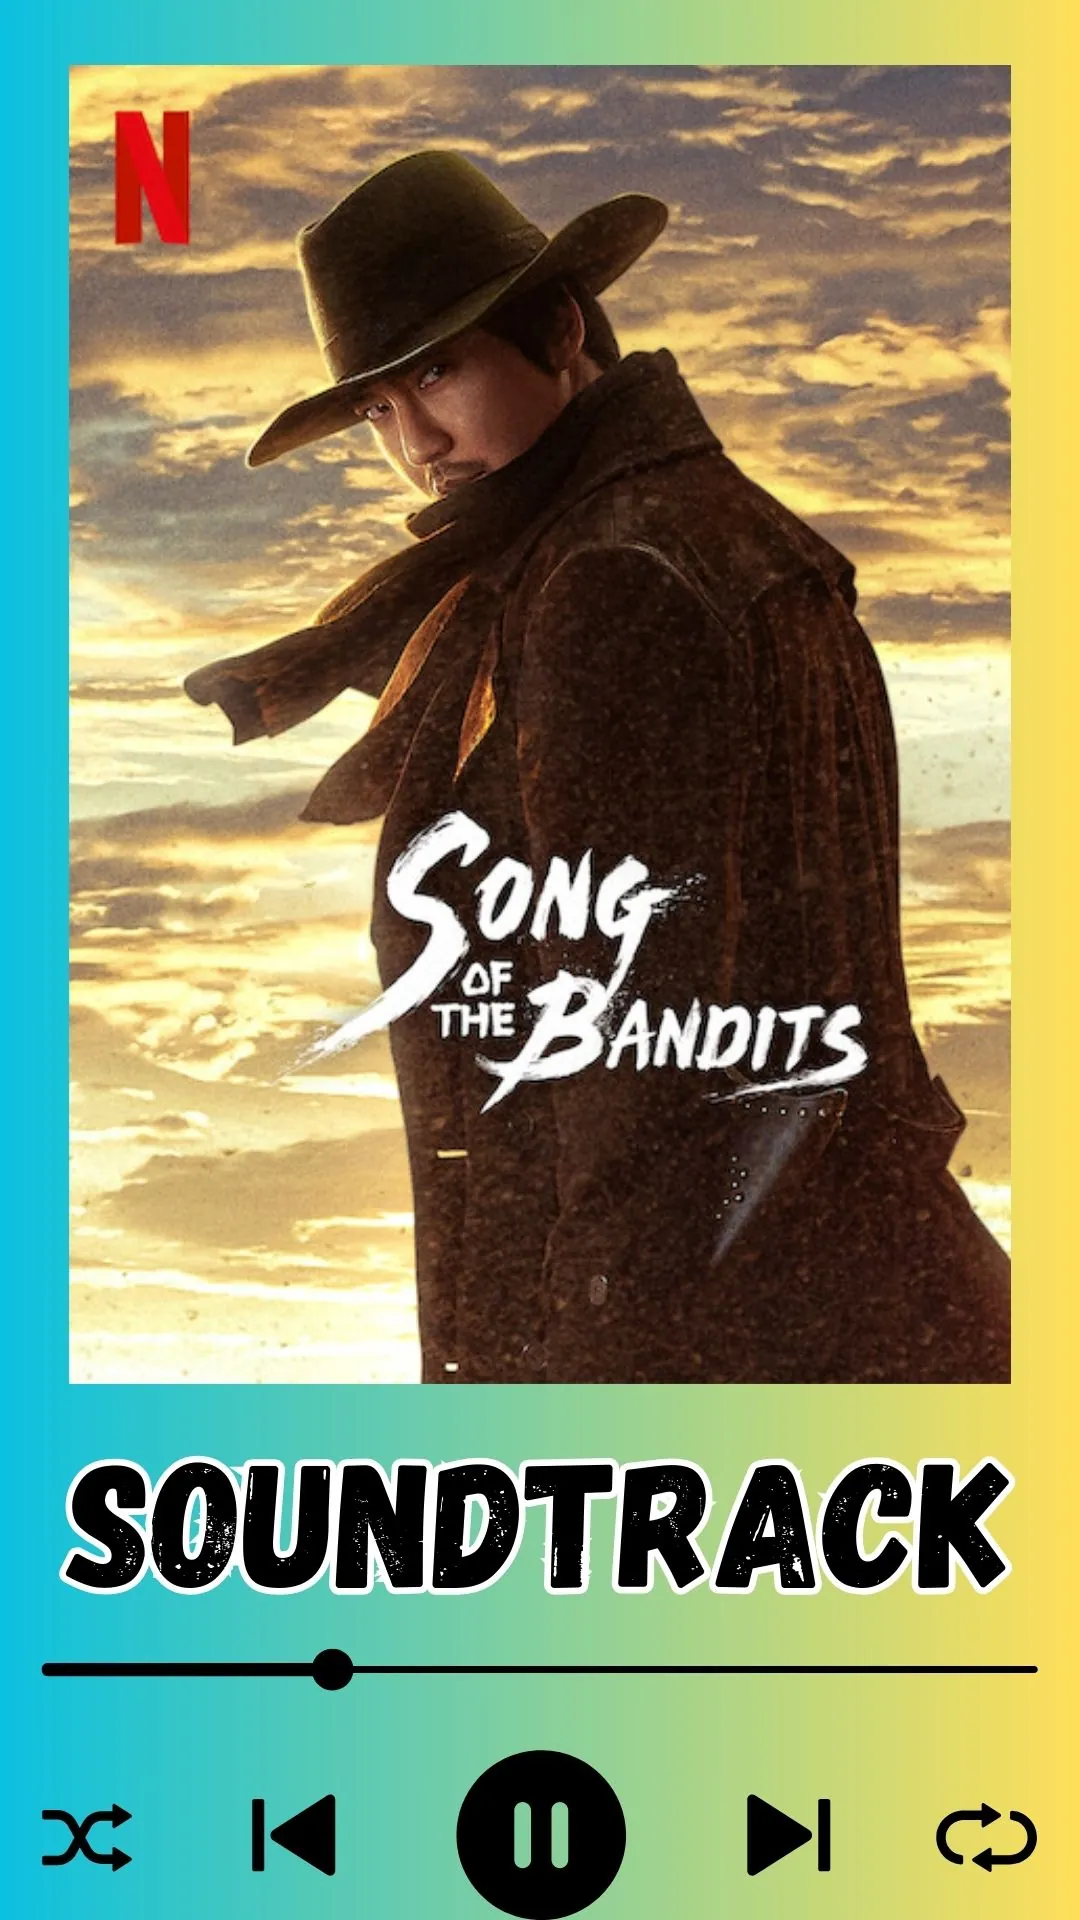 Song of the Bandits Soundtrack